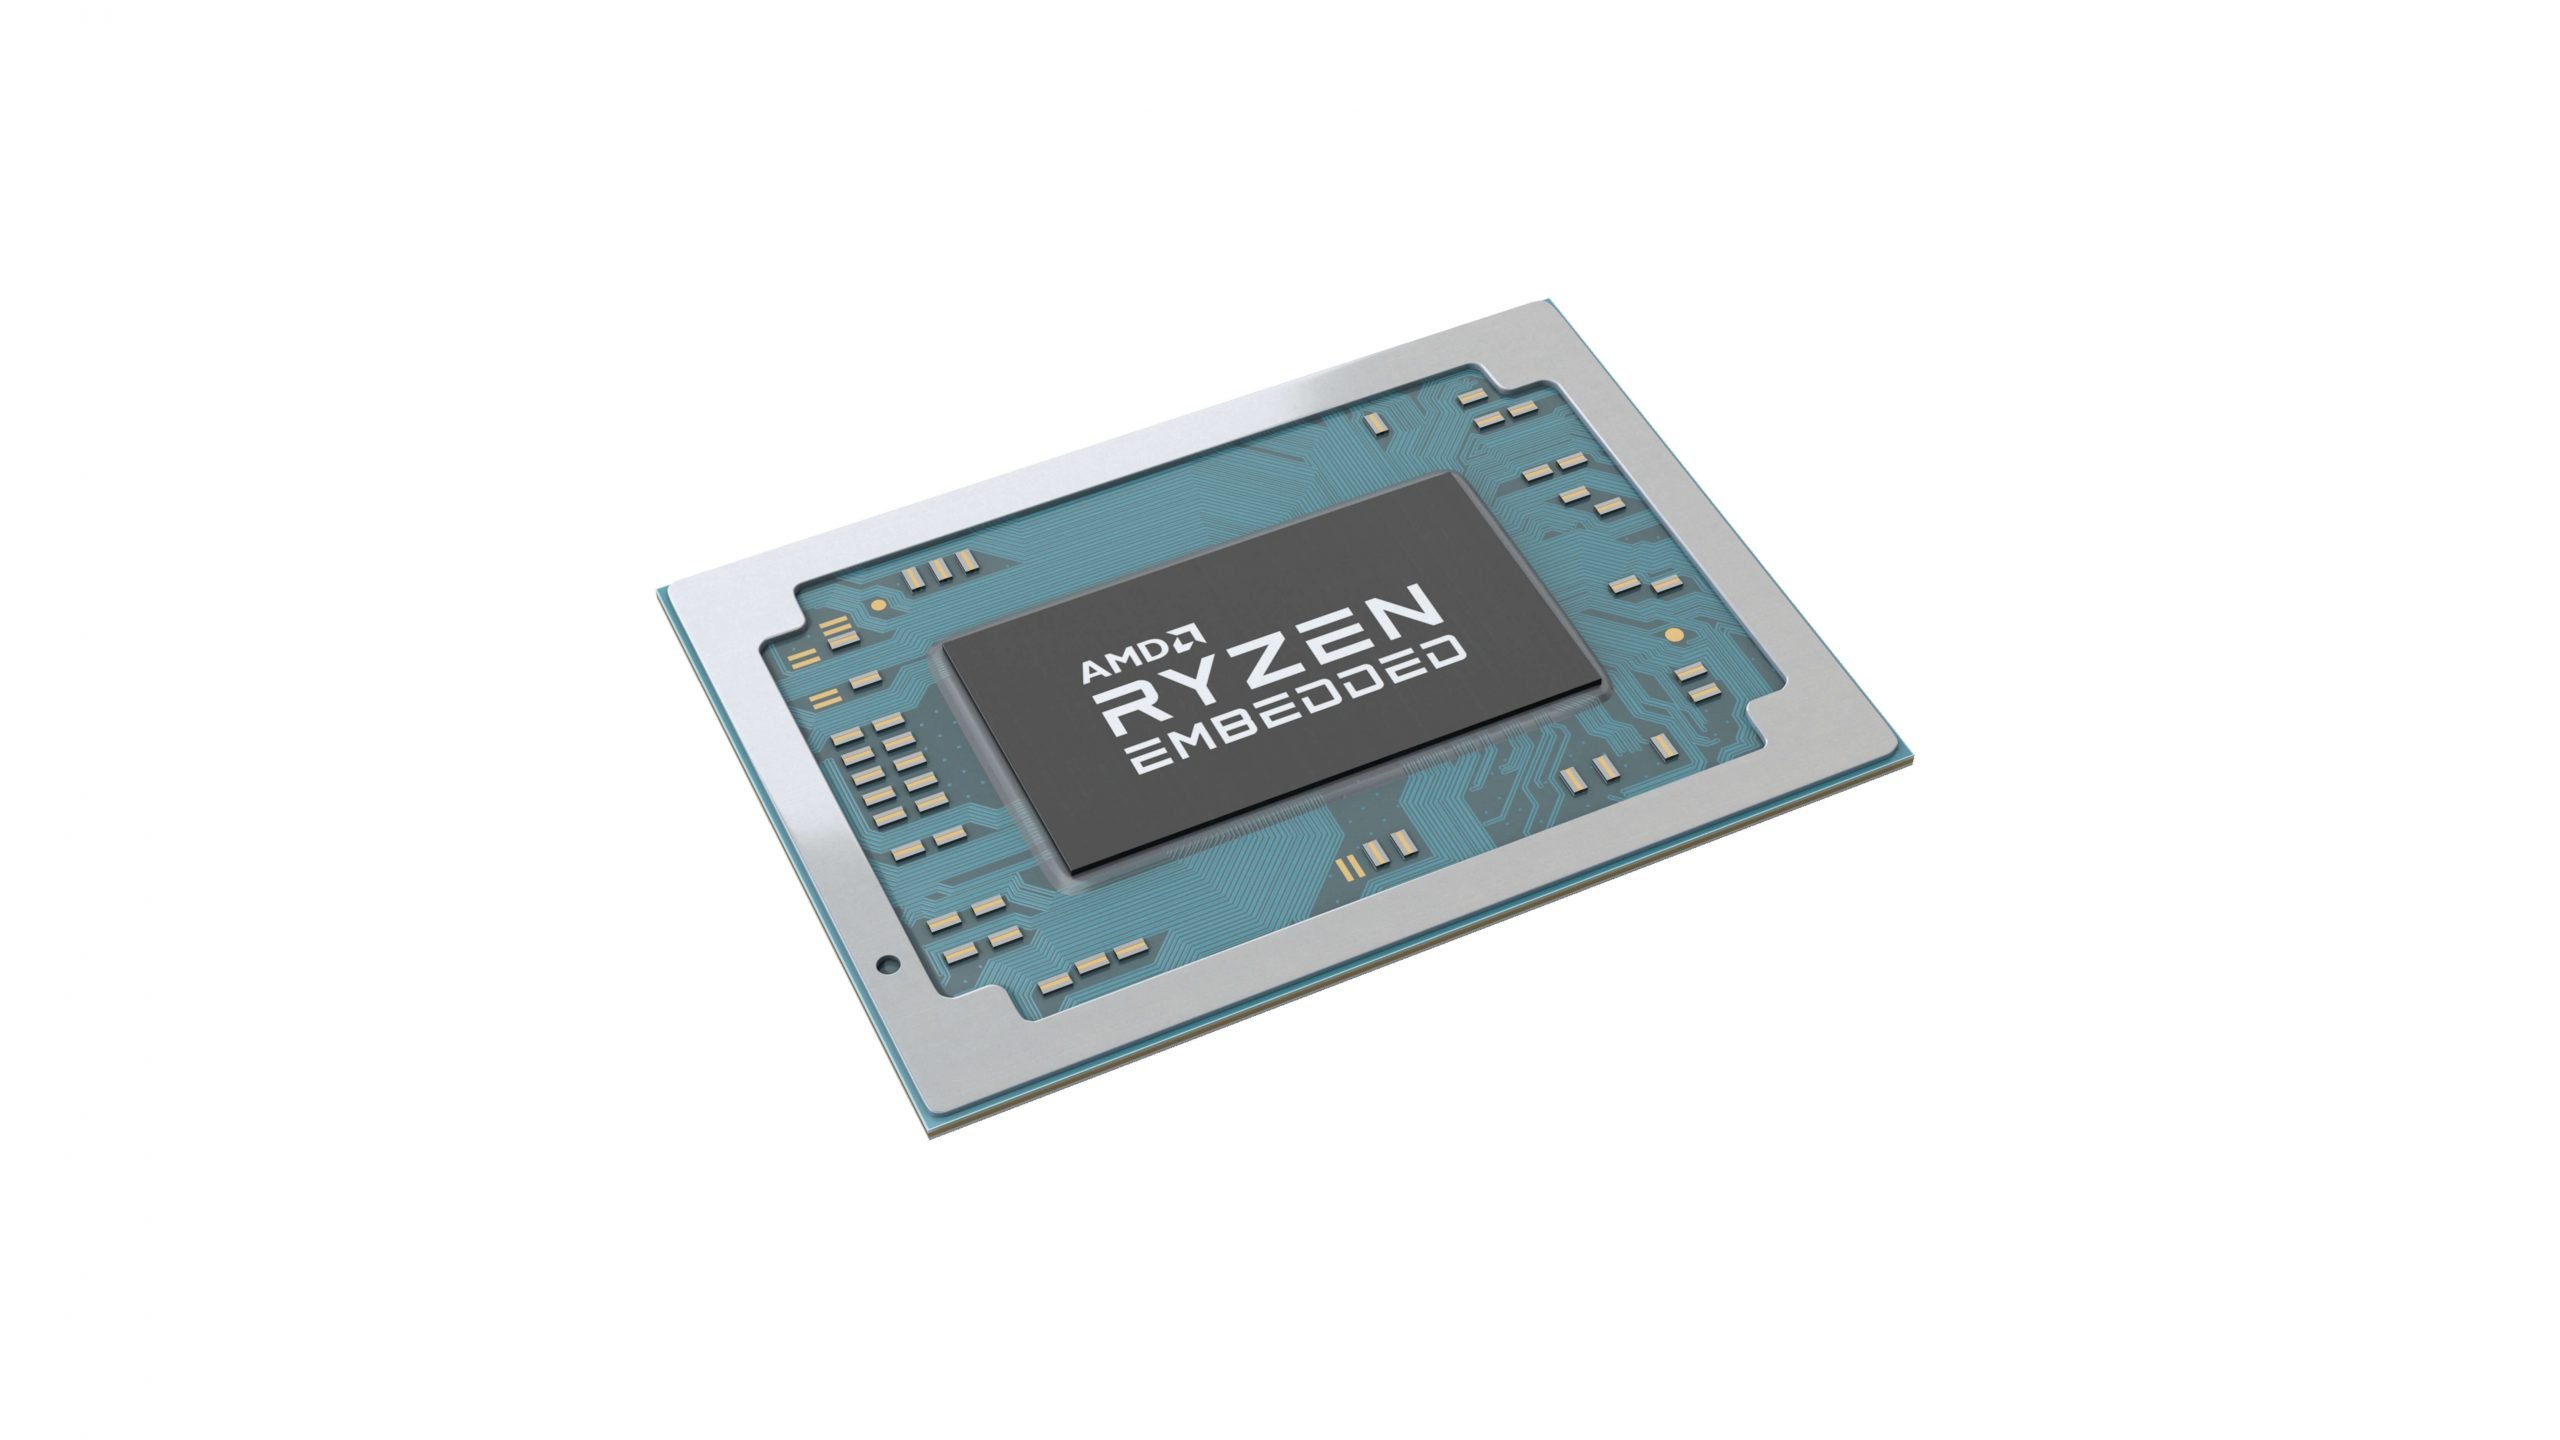 AMD Announces Ryzen Embedded R2000 Series with Optimized Performance and Power Efficiency for Industrial, Machine Vision, IoT and Thin-Client Solutions